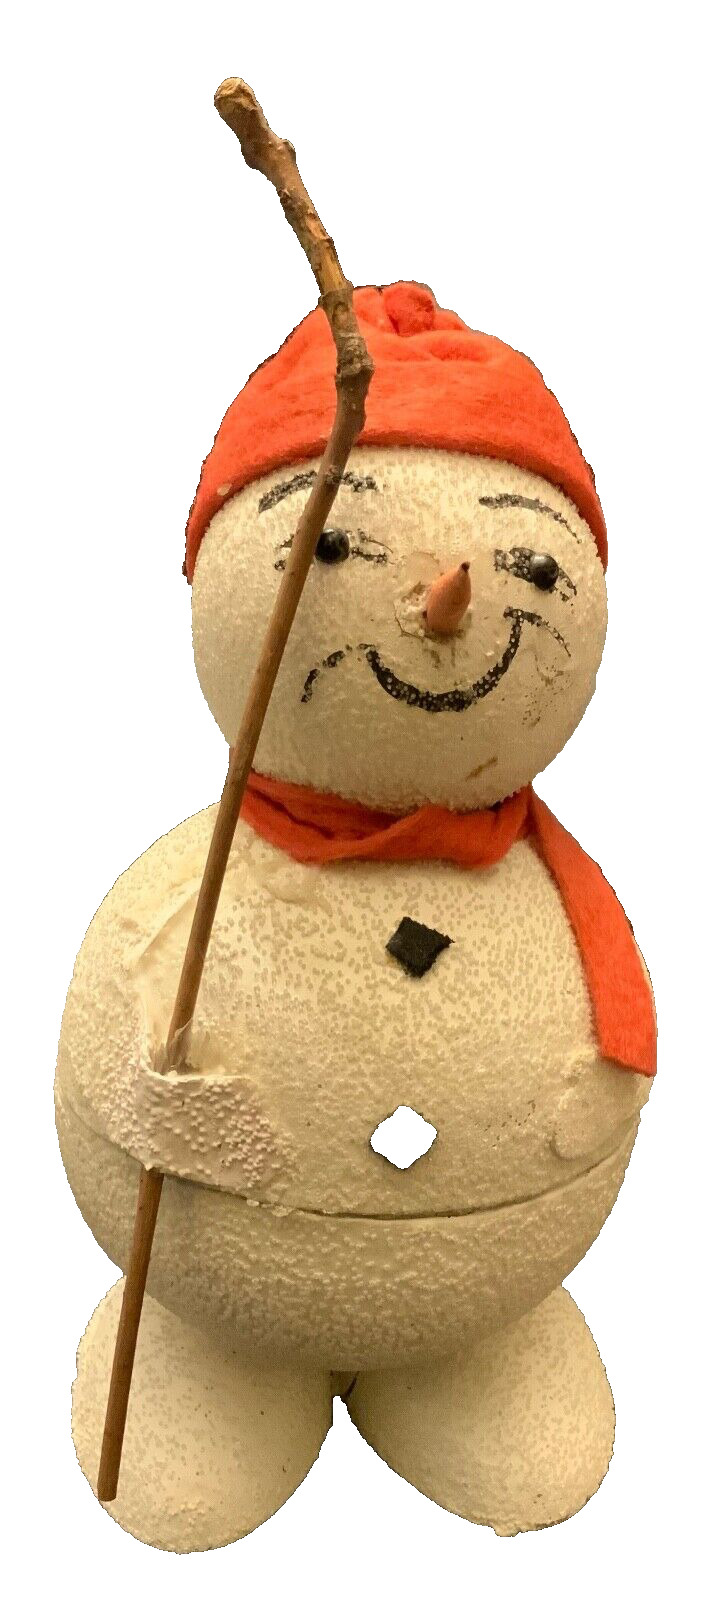 VINTAGE GERMAN CANDY CONTAINER - SNOWMAN WITH STICK & RED FELT SCARF/CAP